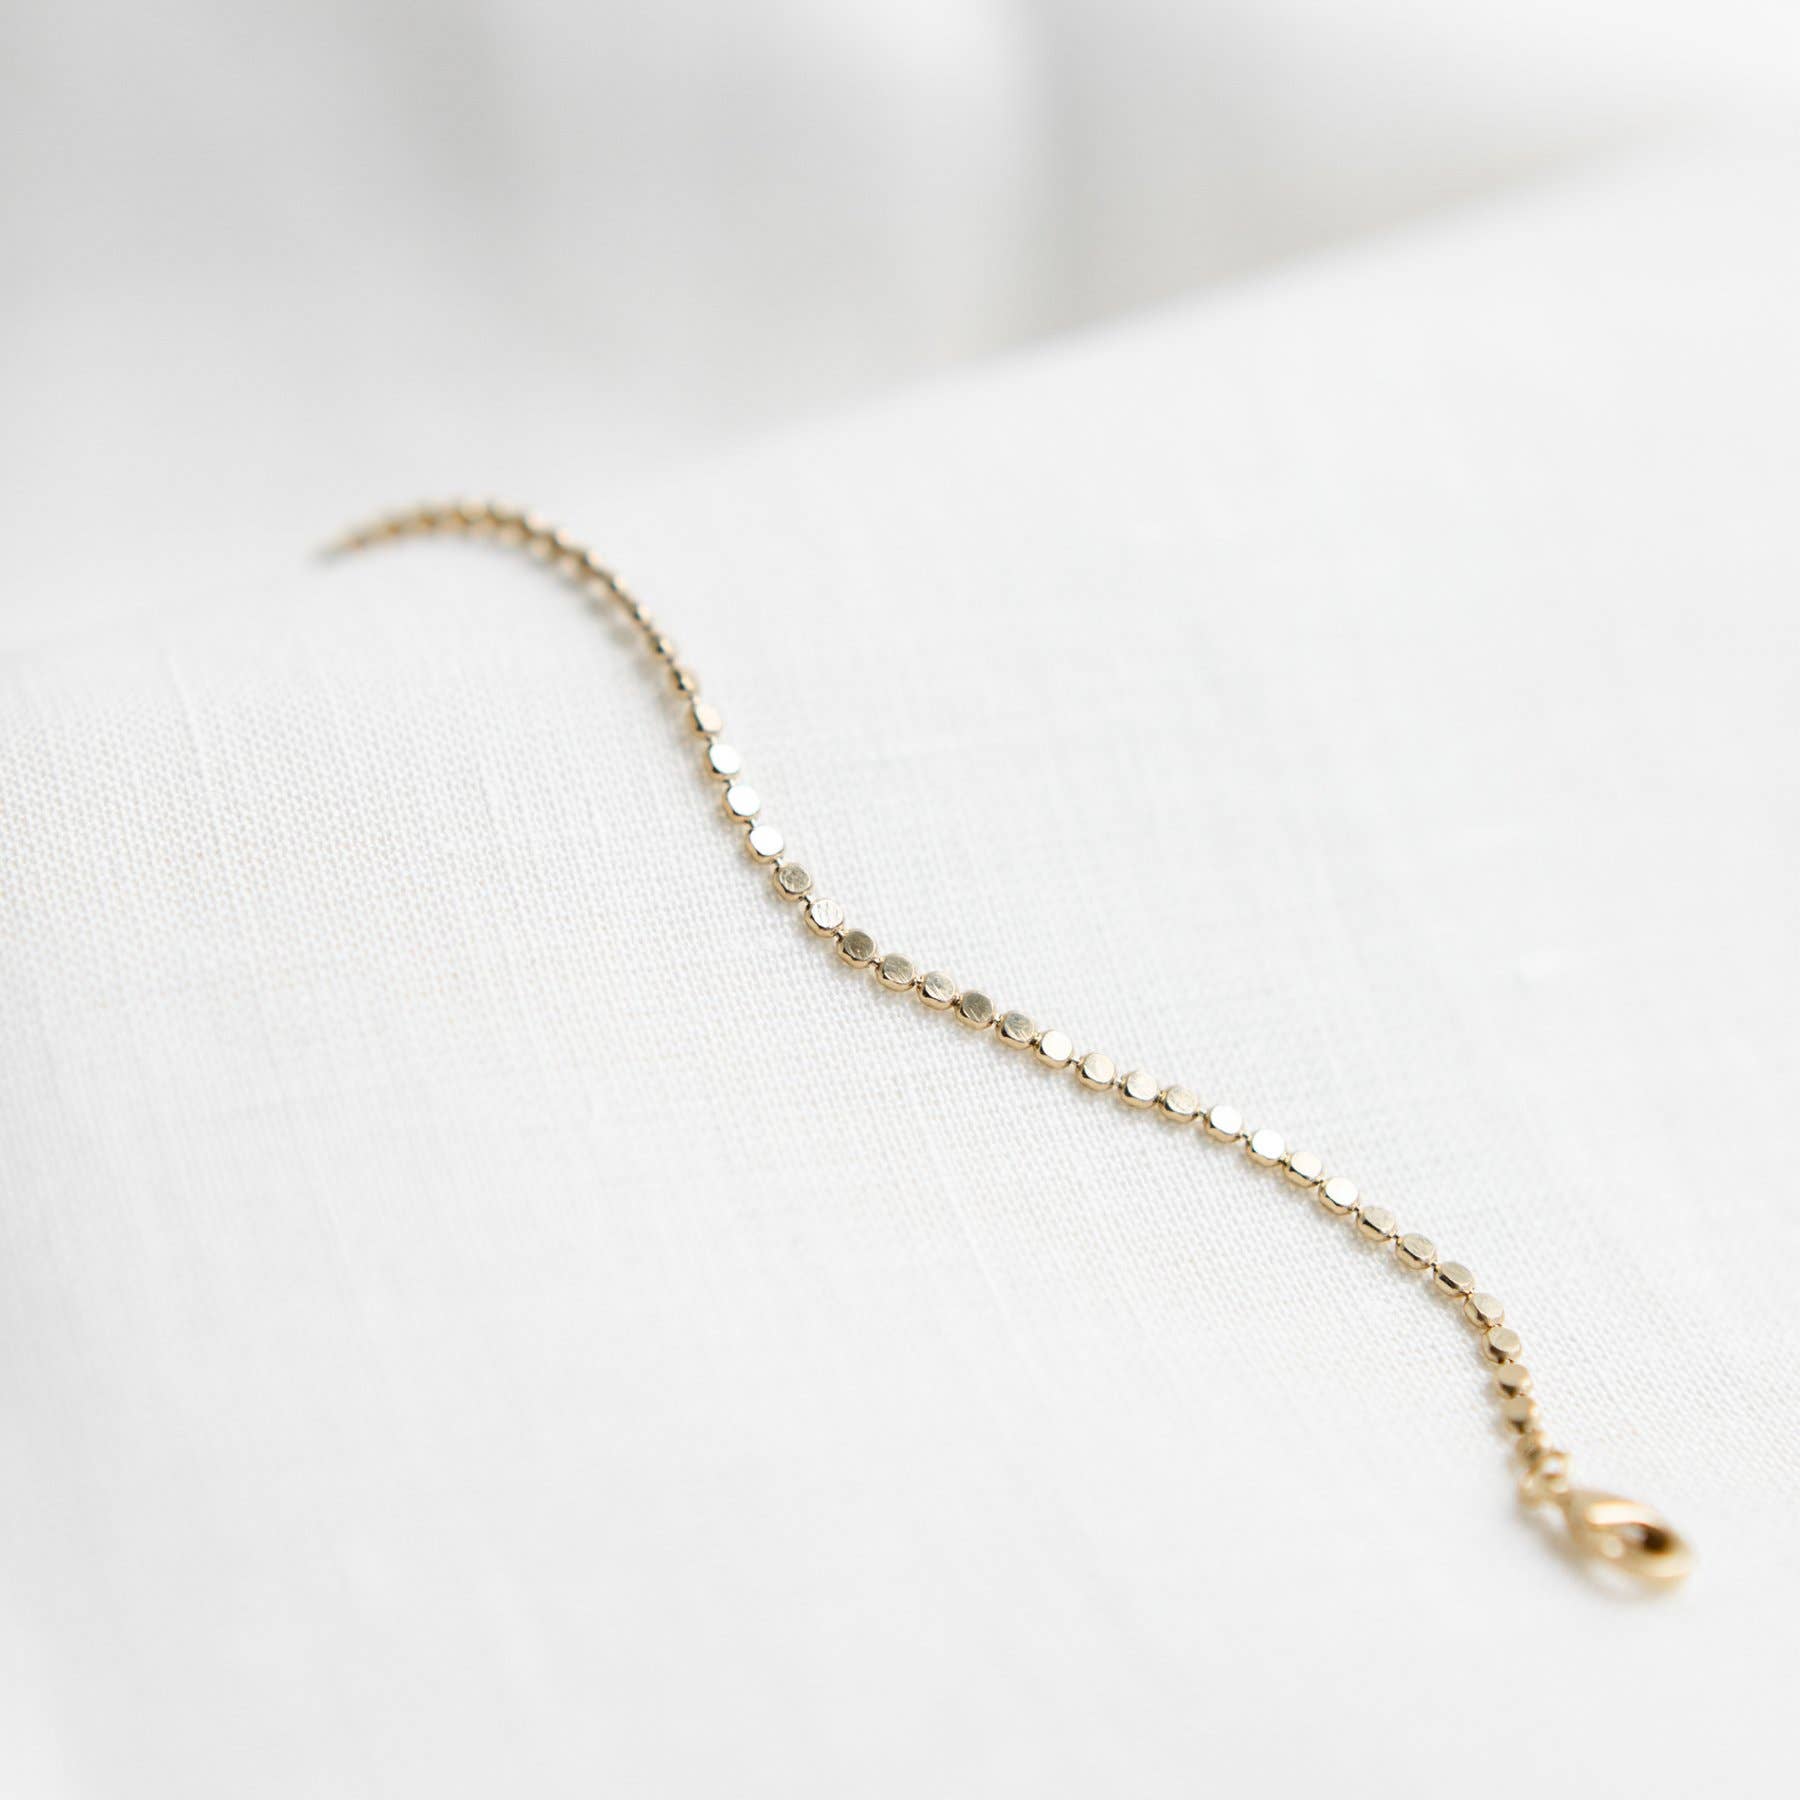 Anatole Bracelet | Jewelry Gold Gift Waterproof - Out of the Blue